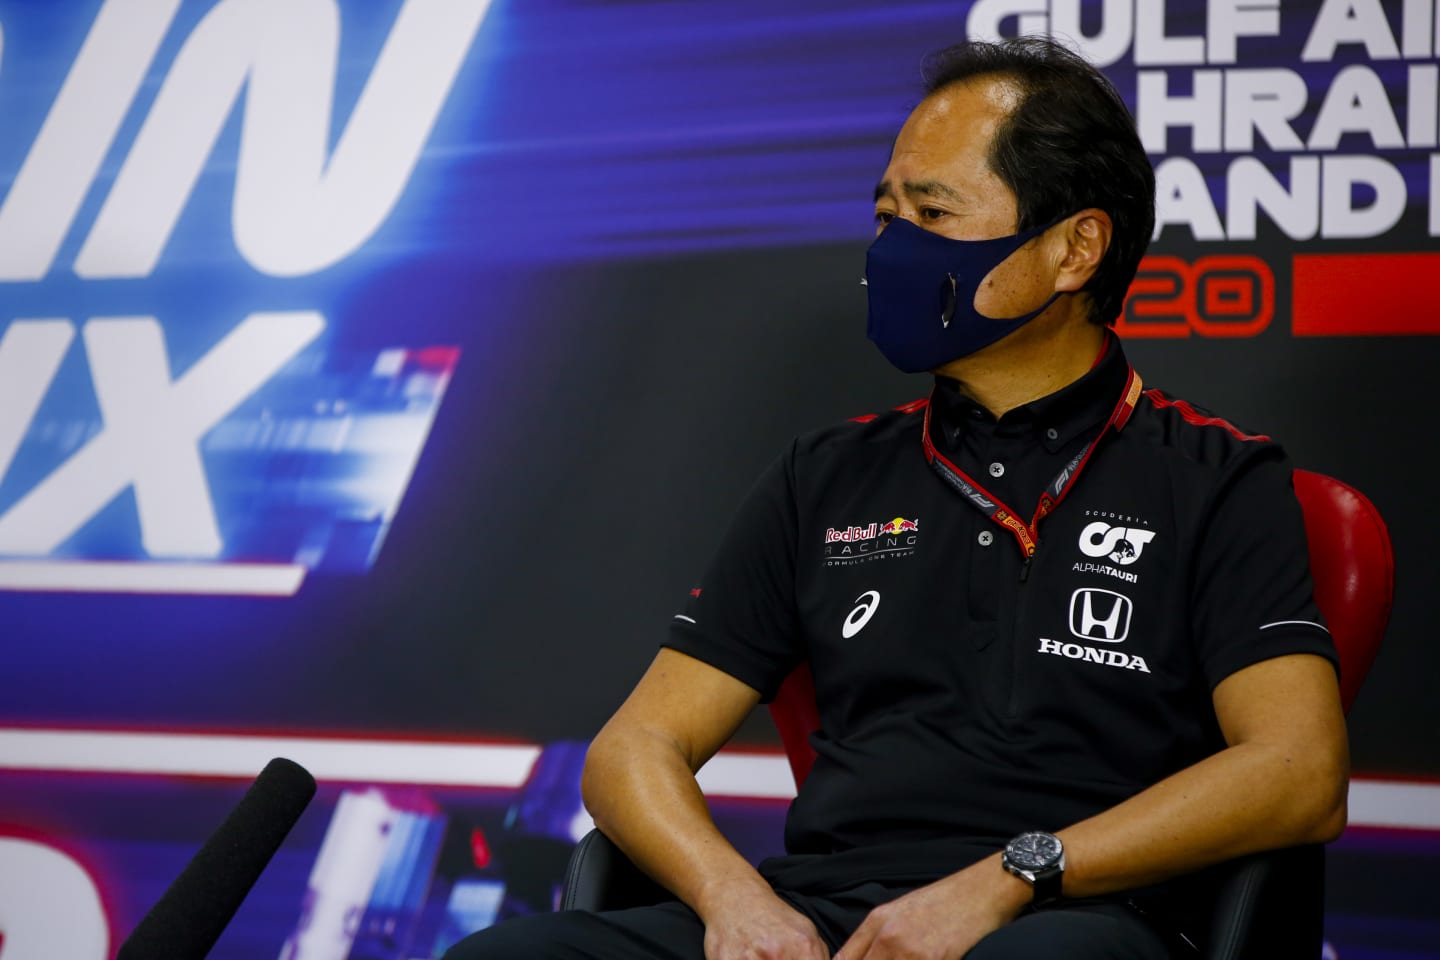 BAHRAIN, BAHRAIN - NOVEMBER 27: Toyoharu Tanabe of Honda talks in the Team Principals Press Conference during practice ahead of the F1 Grand Prix of Bahrain at Bahrain International Circuit on November 27, 2020 in Bahrain, Bahrain. (Photo by Andy Hone - Pool/Getty Images)